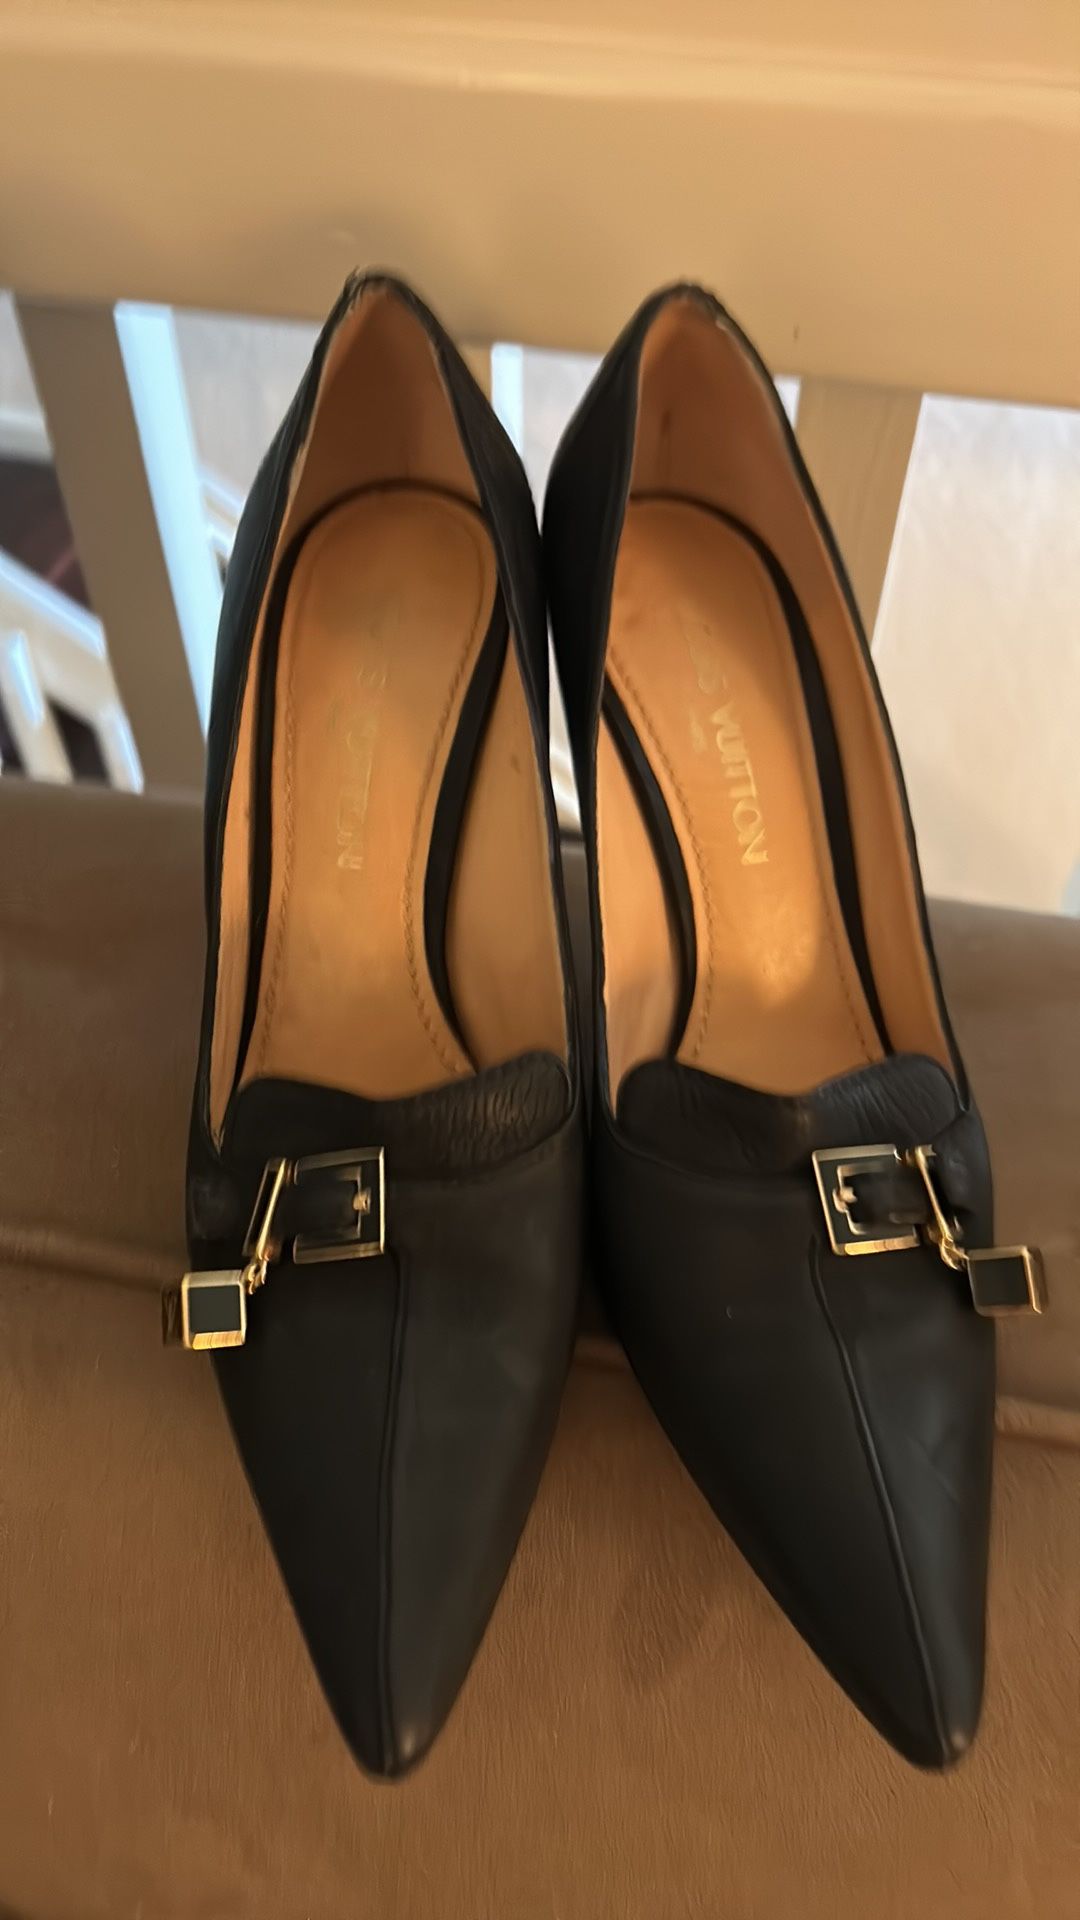 Designer Shoes, Janelle And Louis Vuitton Size 9 for Sale in Naples, FL -  OfferUp